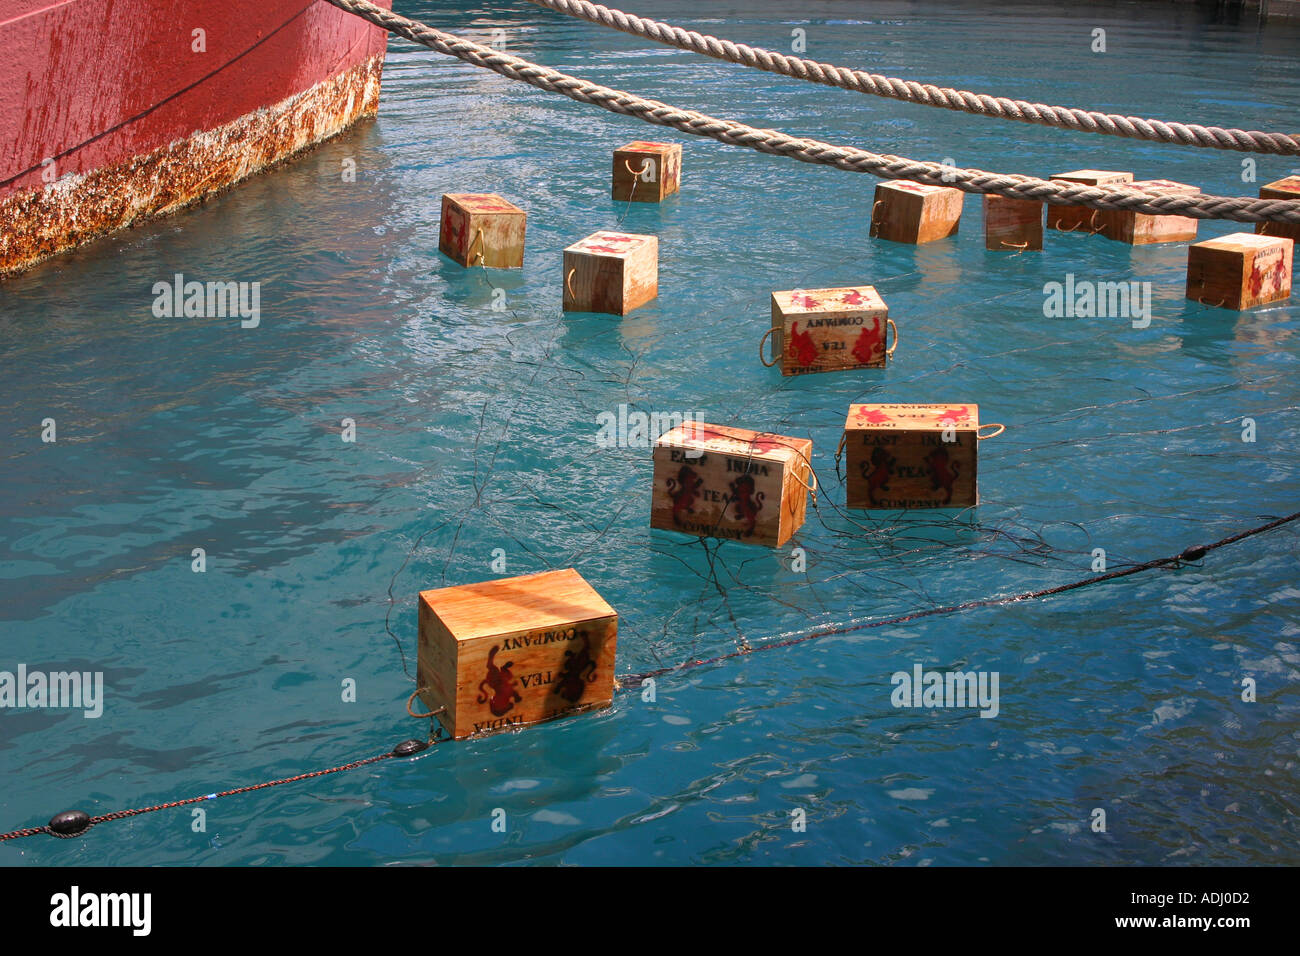 Boxes of tea floating in harbor during a Boston Tea Party reenactment Stock Photo